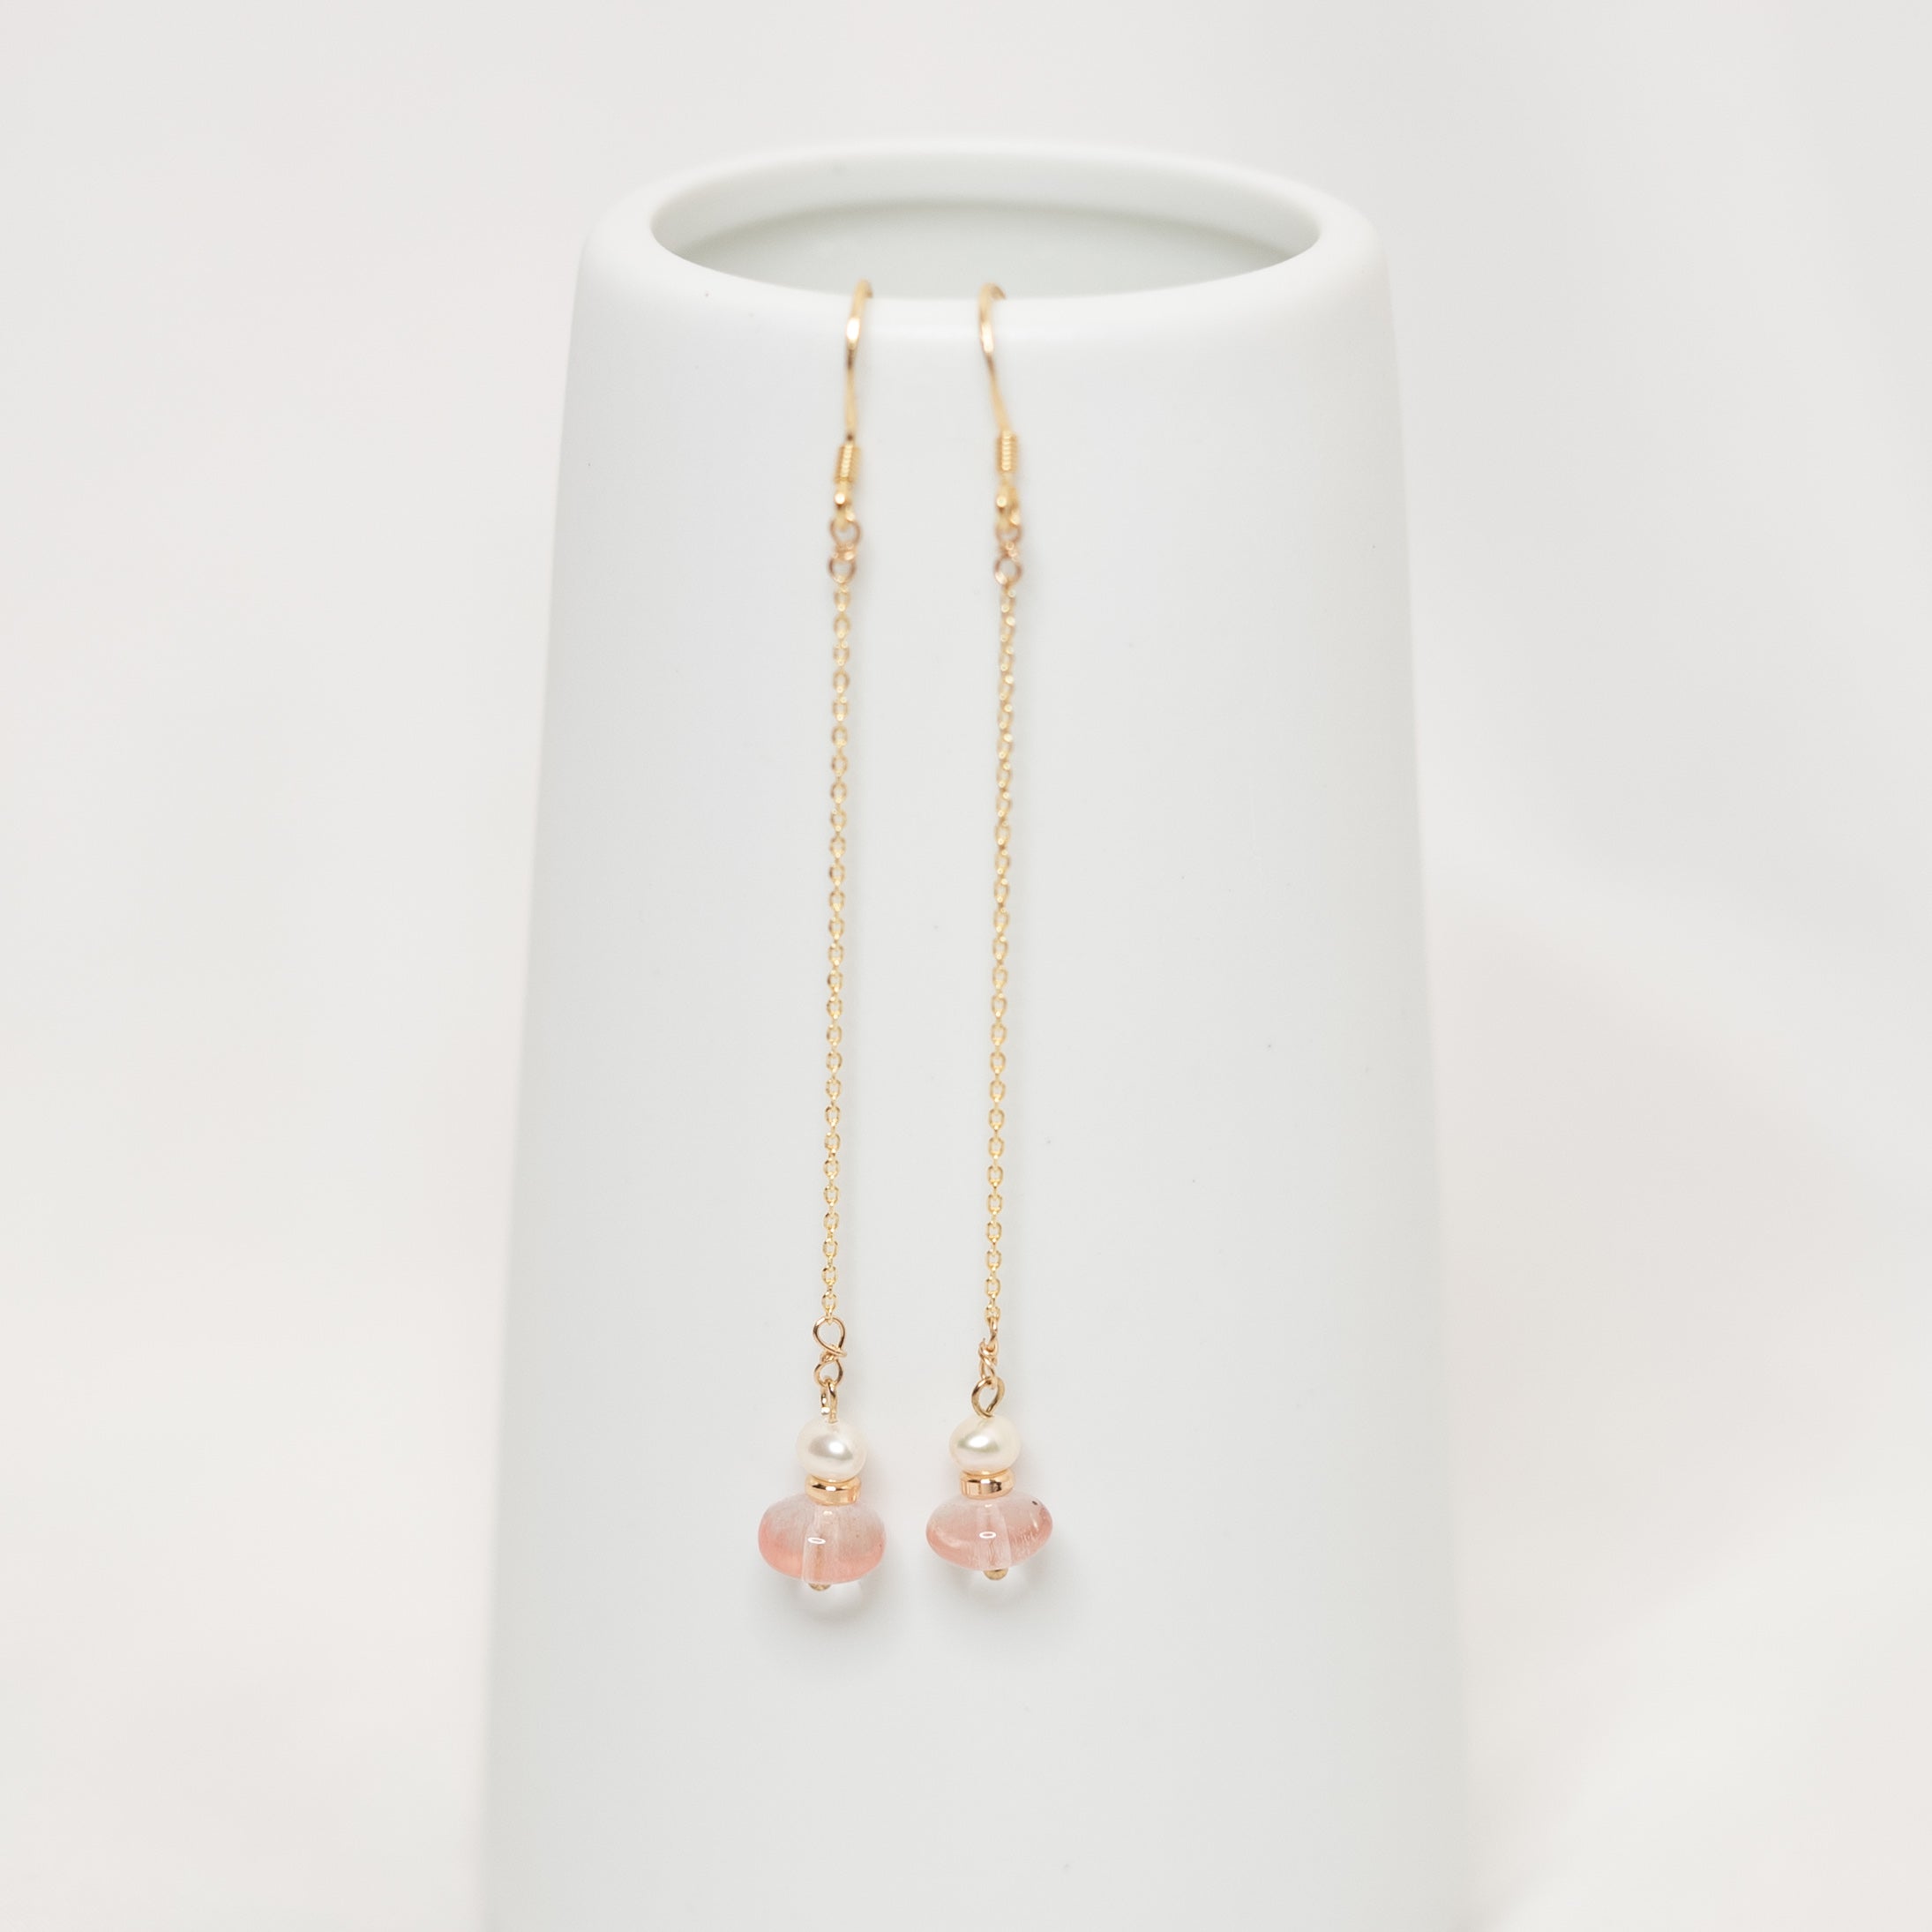 Plum Blossom Necklace in Rose Quartz, Asian Boutique Jewelry from New York